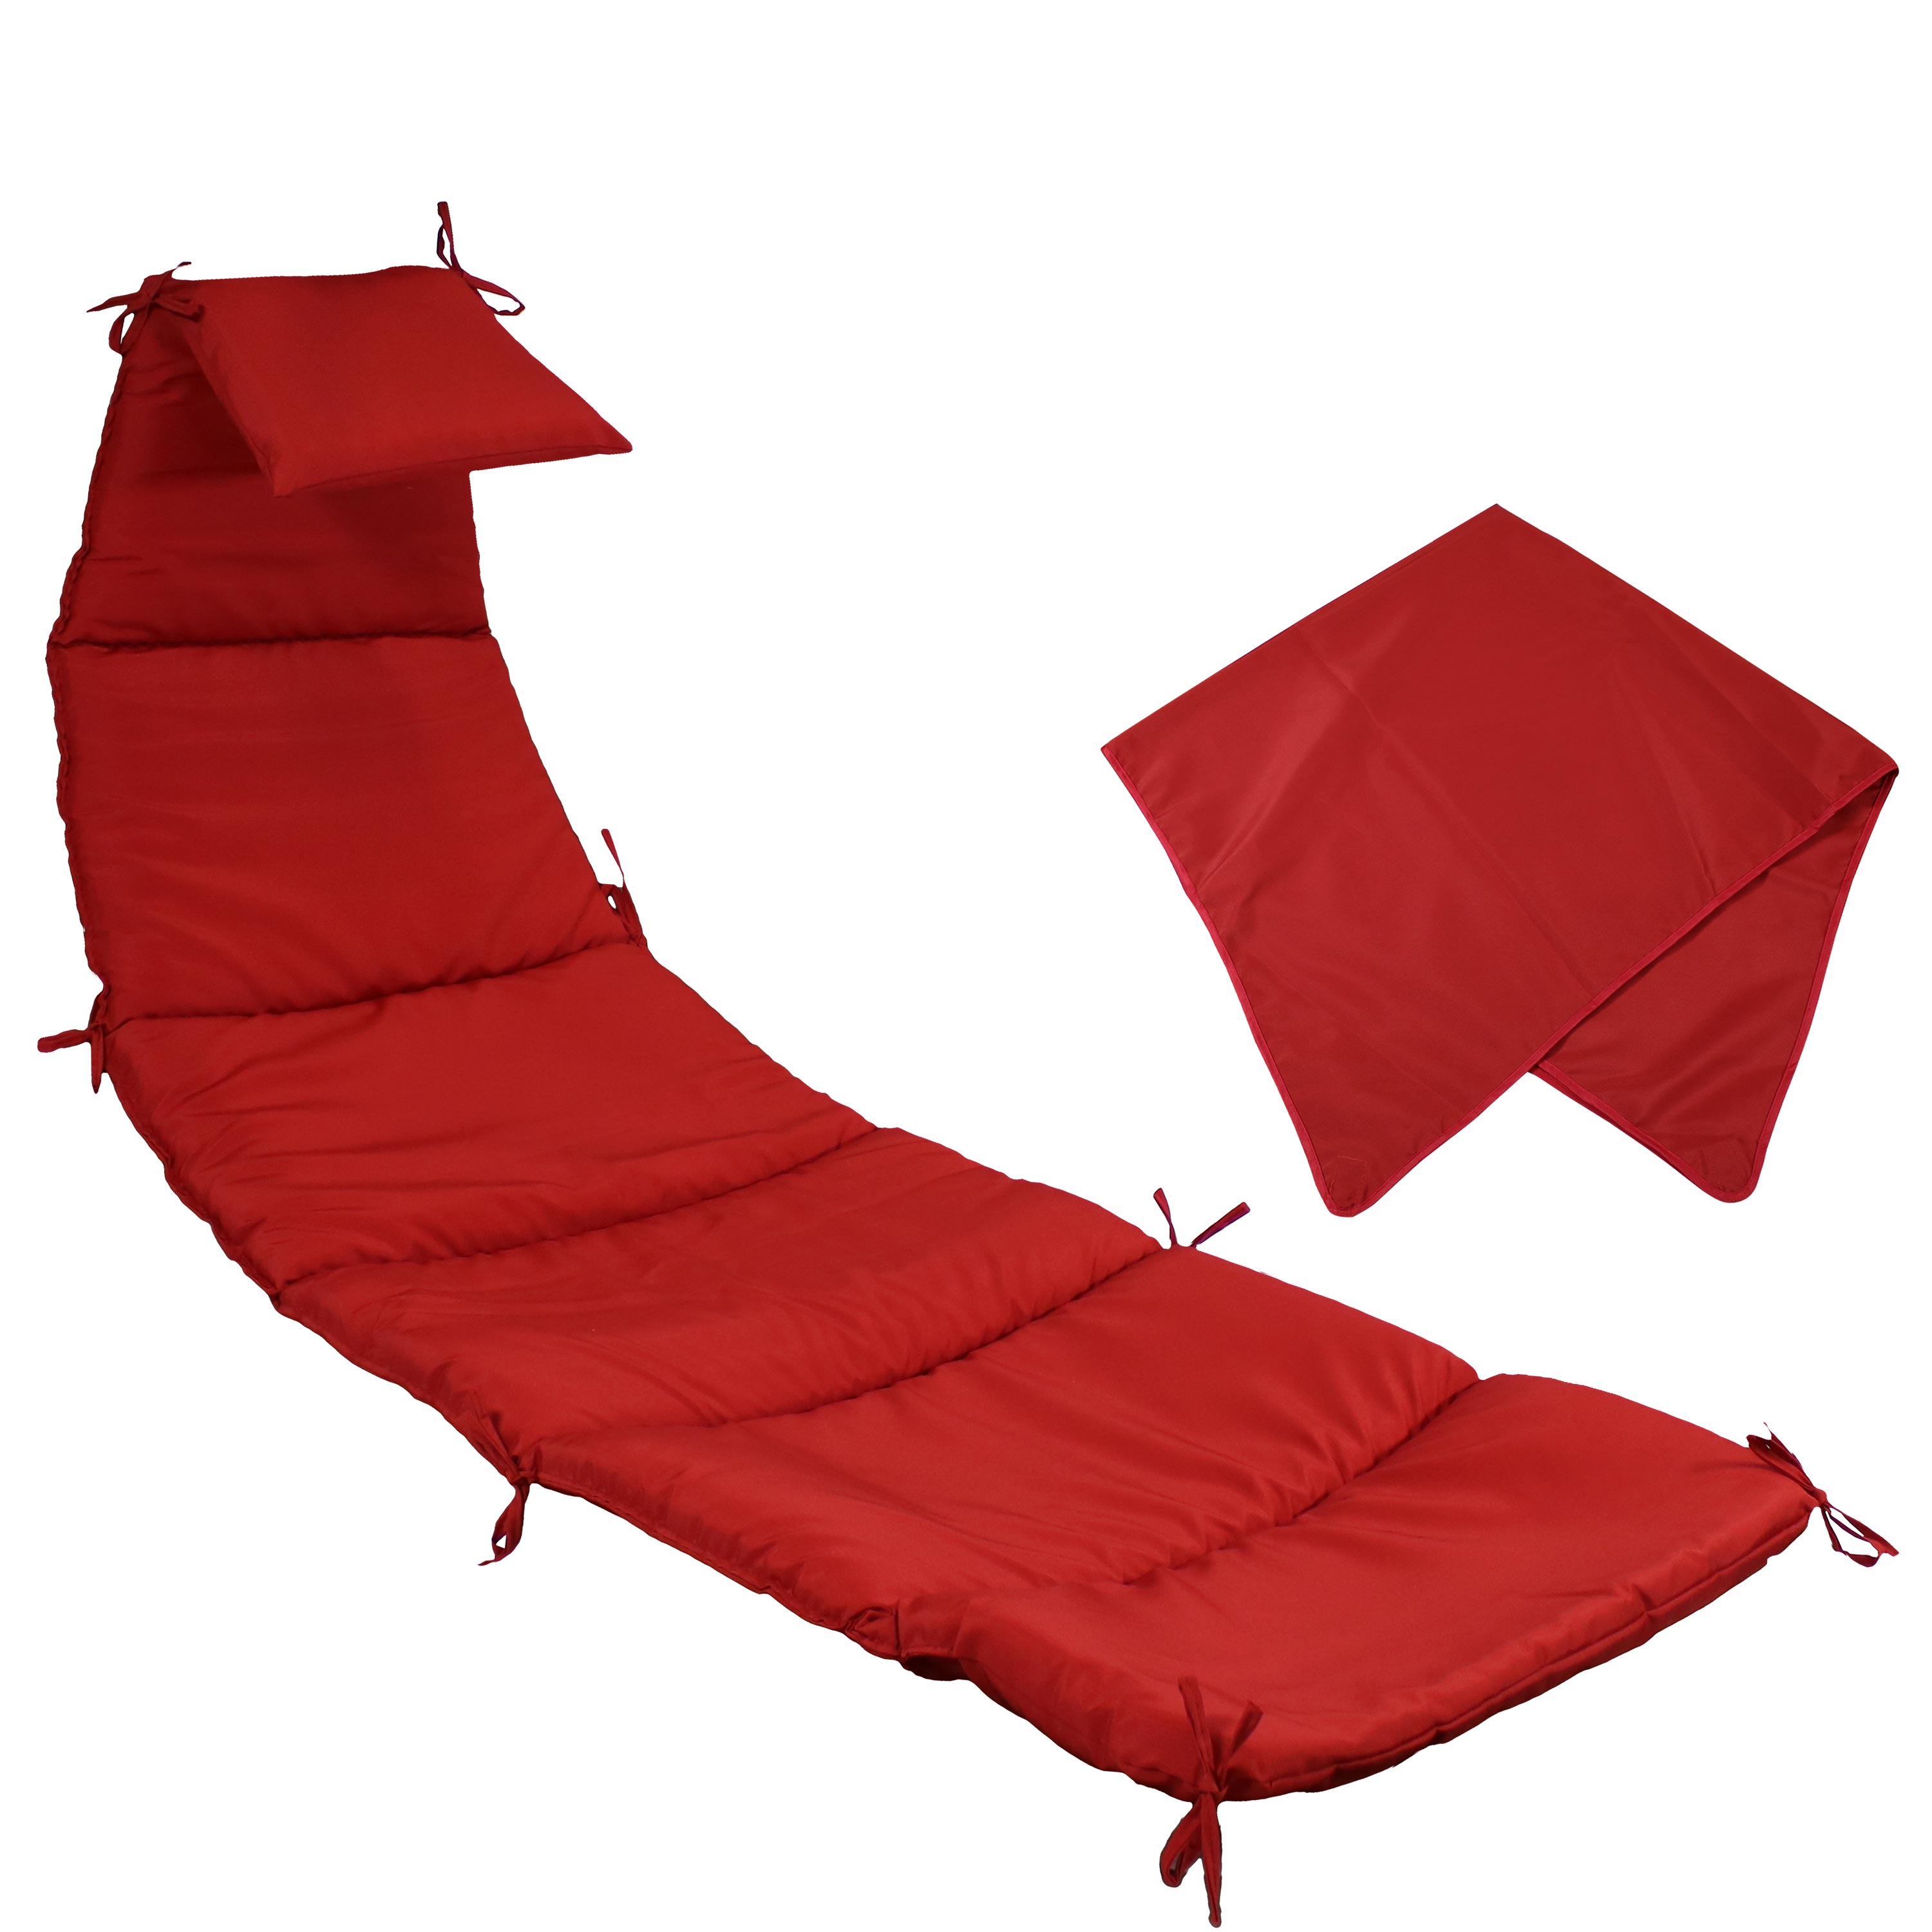 Sunnydaze Hanging Lounge Chair Replacement Cushion and Umbrella, Red